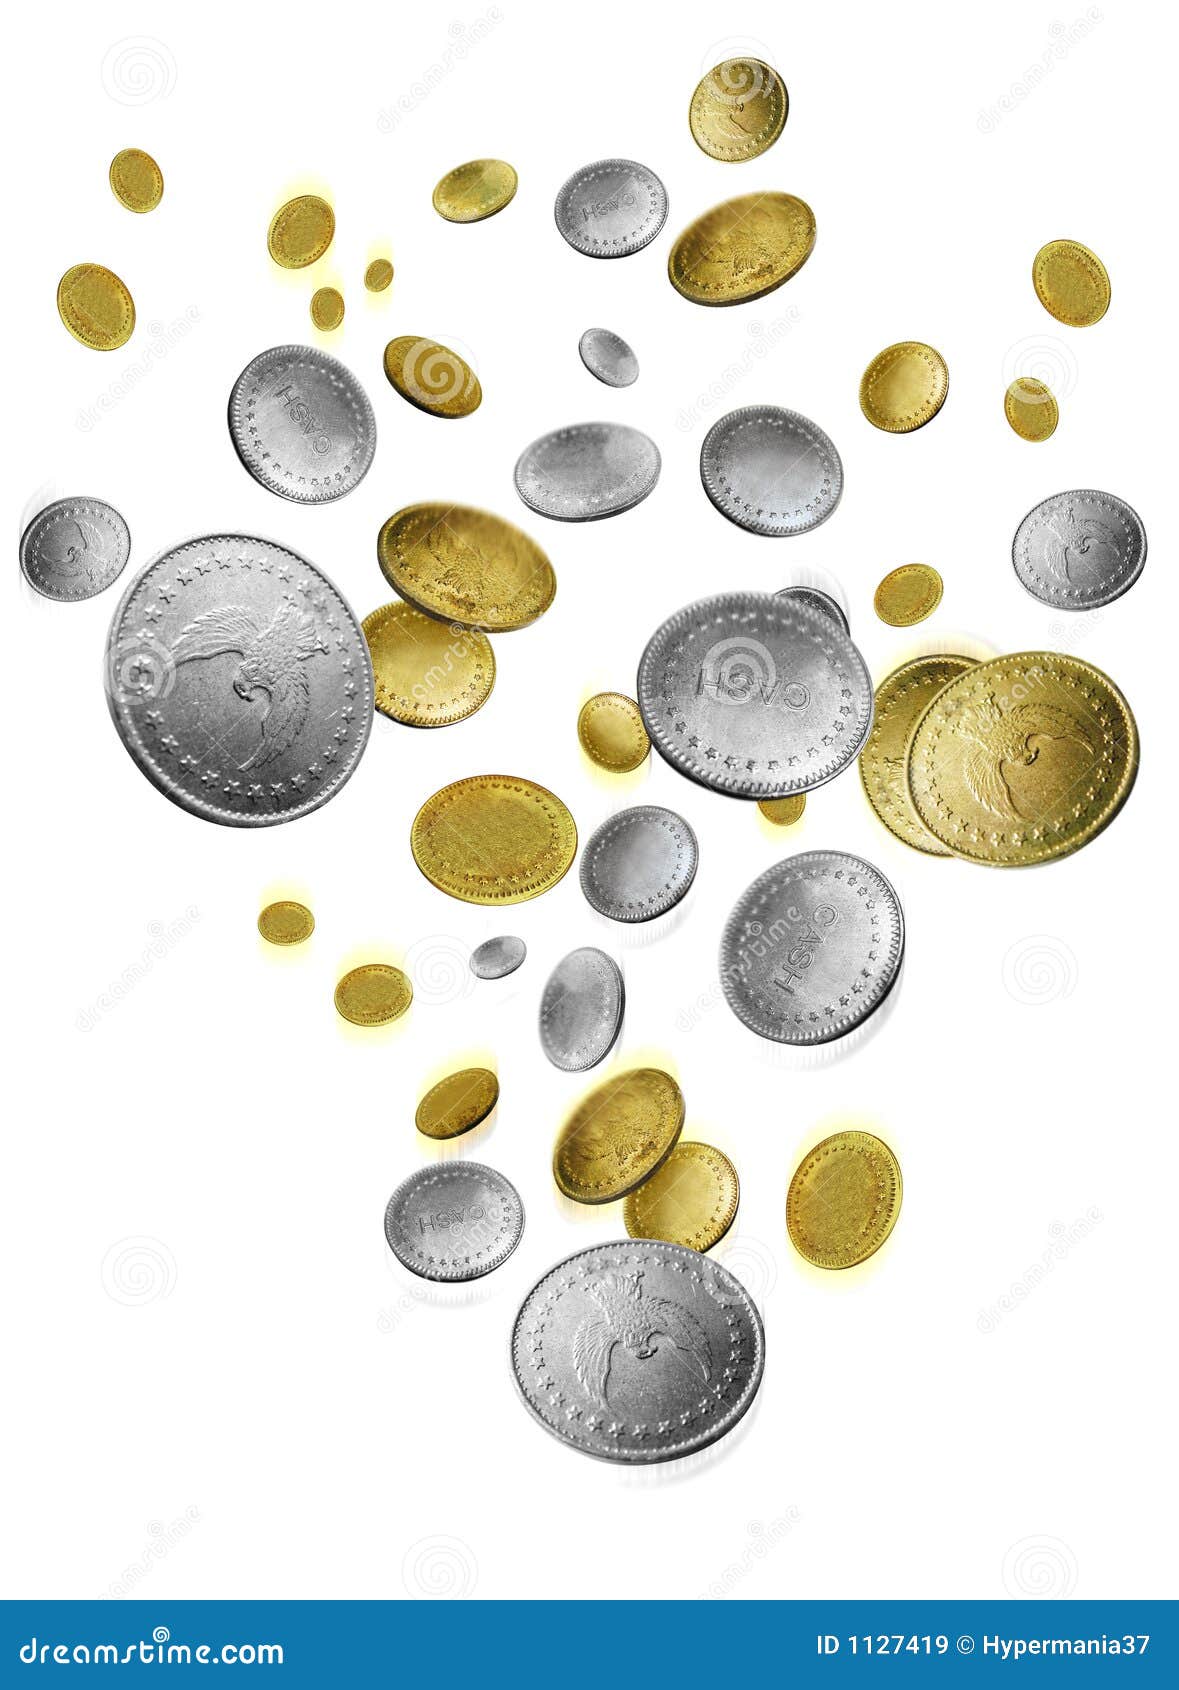 clipart of money falling - photo #45